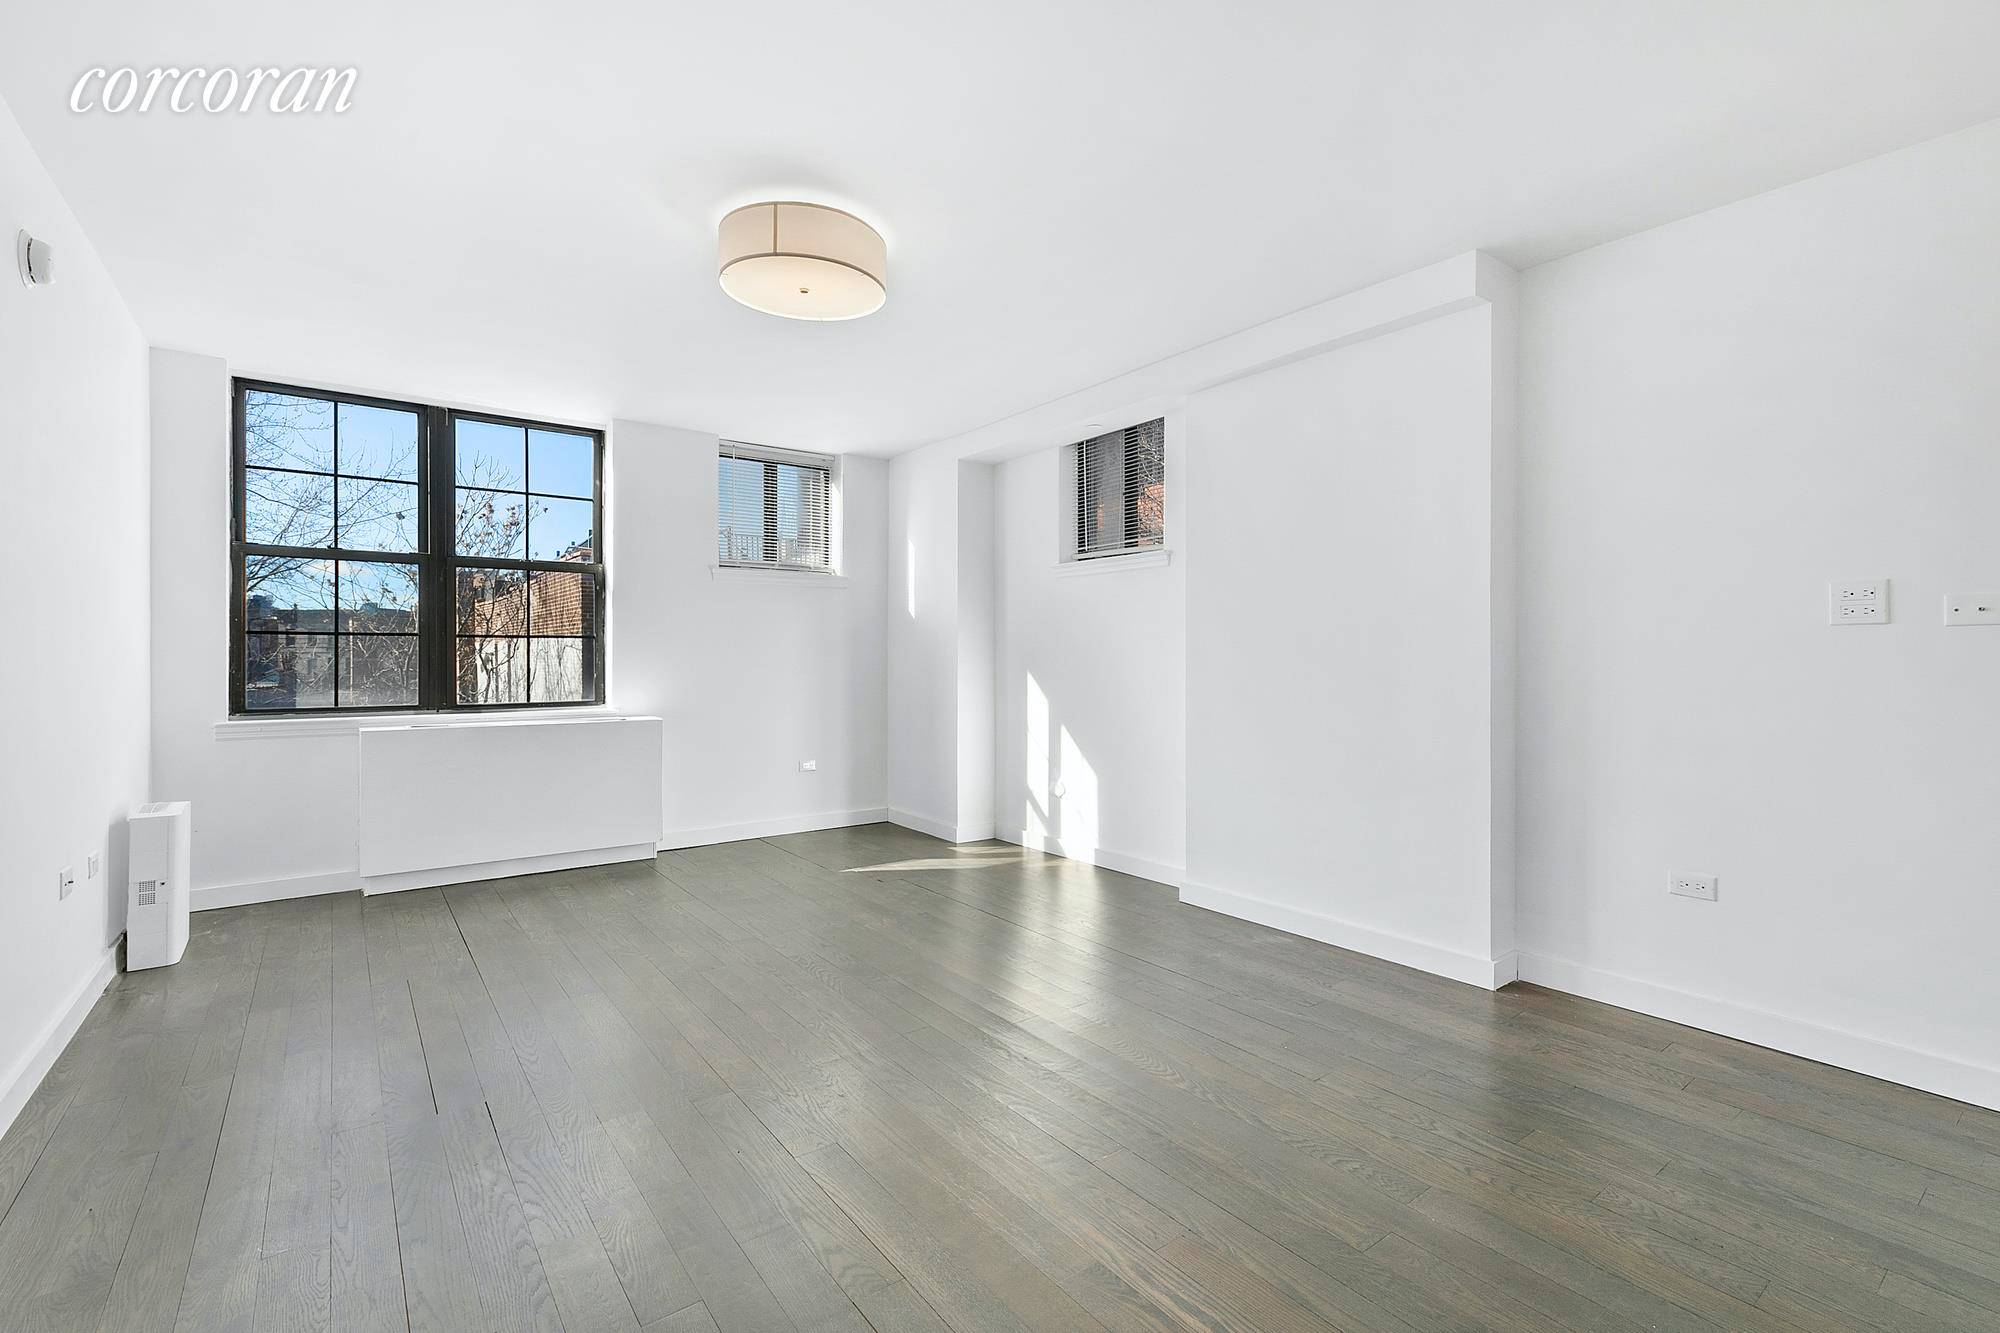 222 West 14th Streeet 5G The Sequoia is a bright and quiet studio apartment tucked away on the rear of this well kept Condominium.